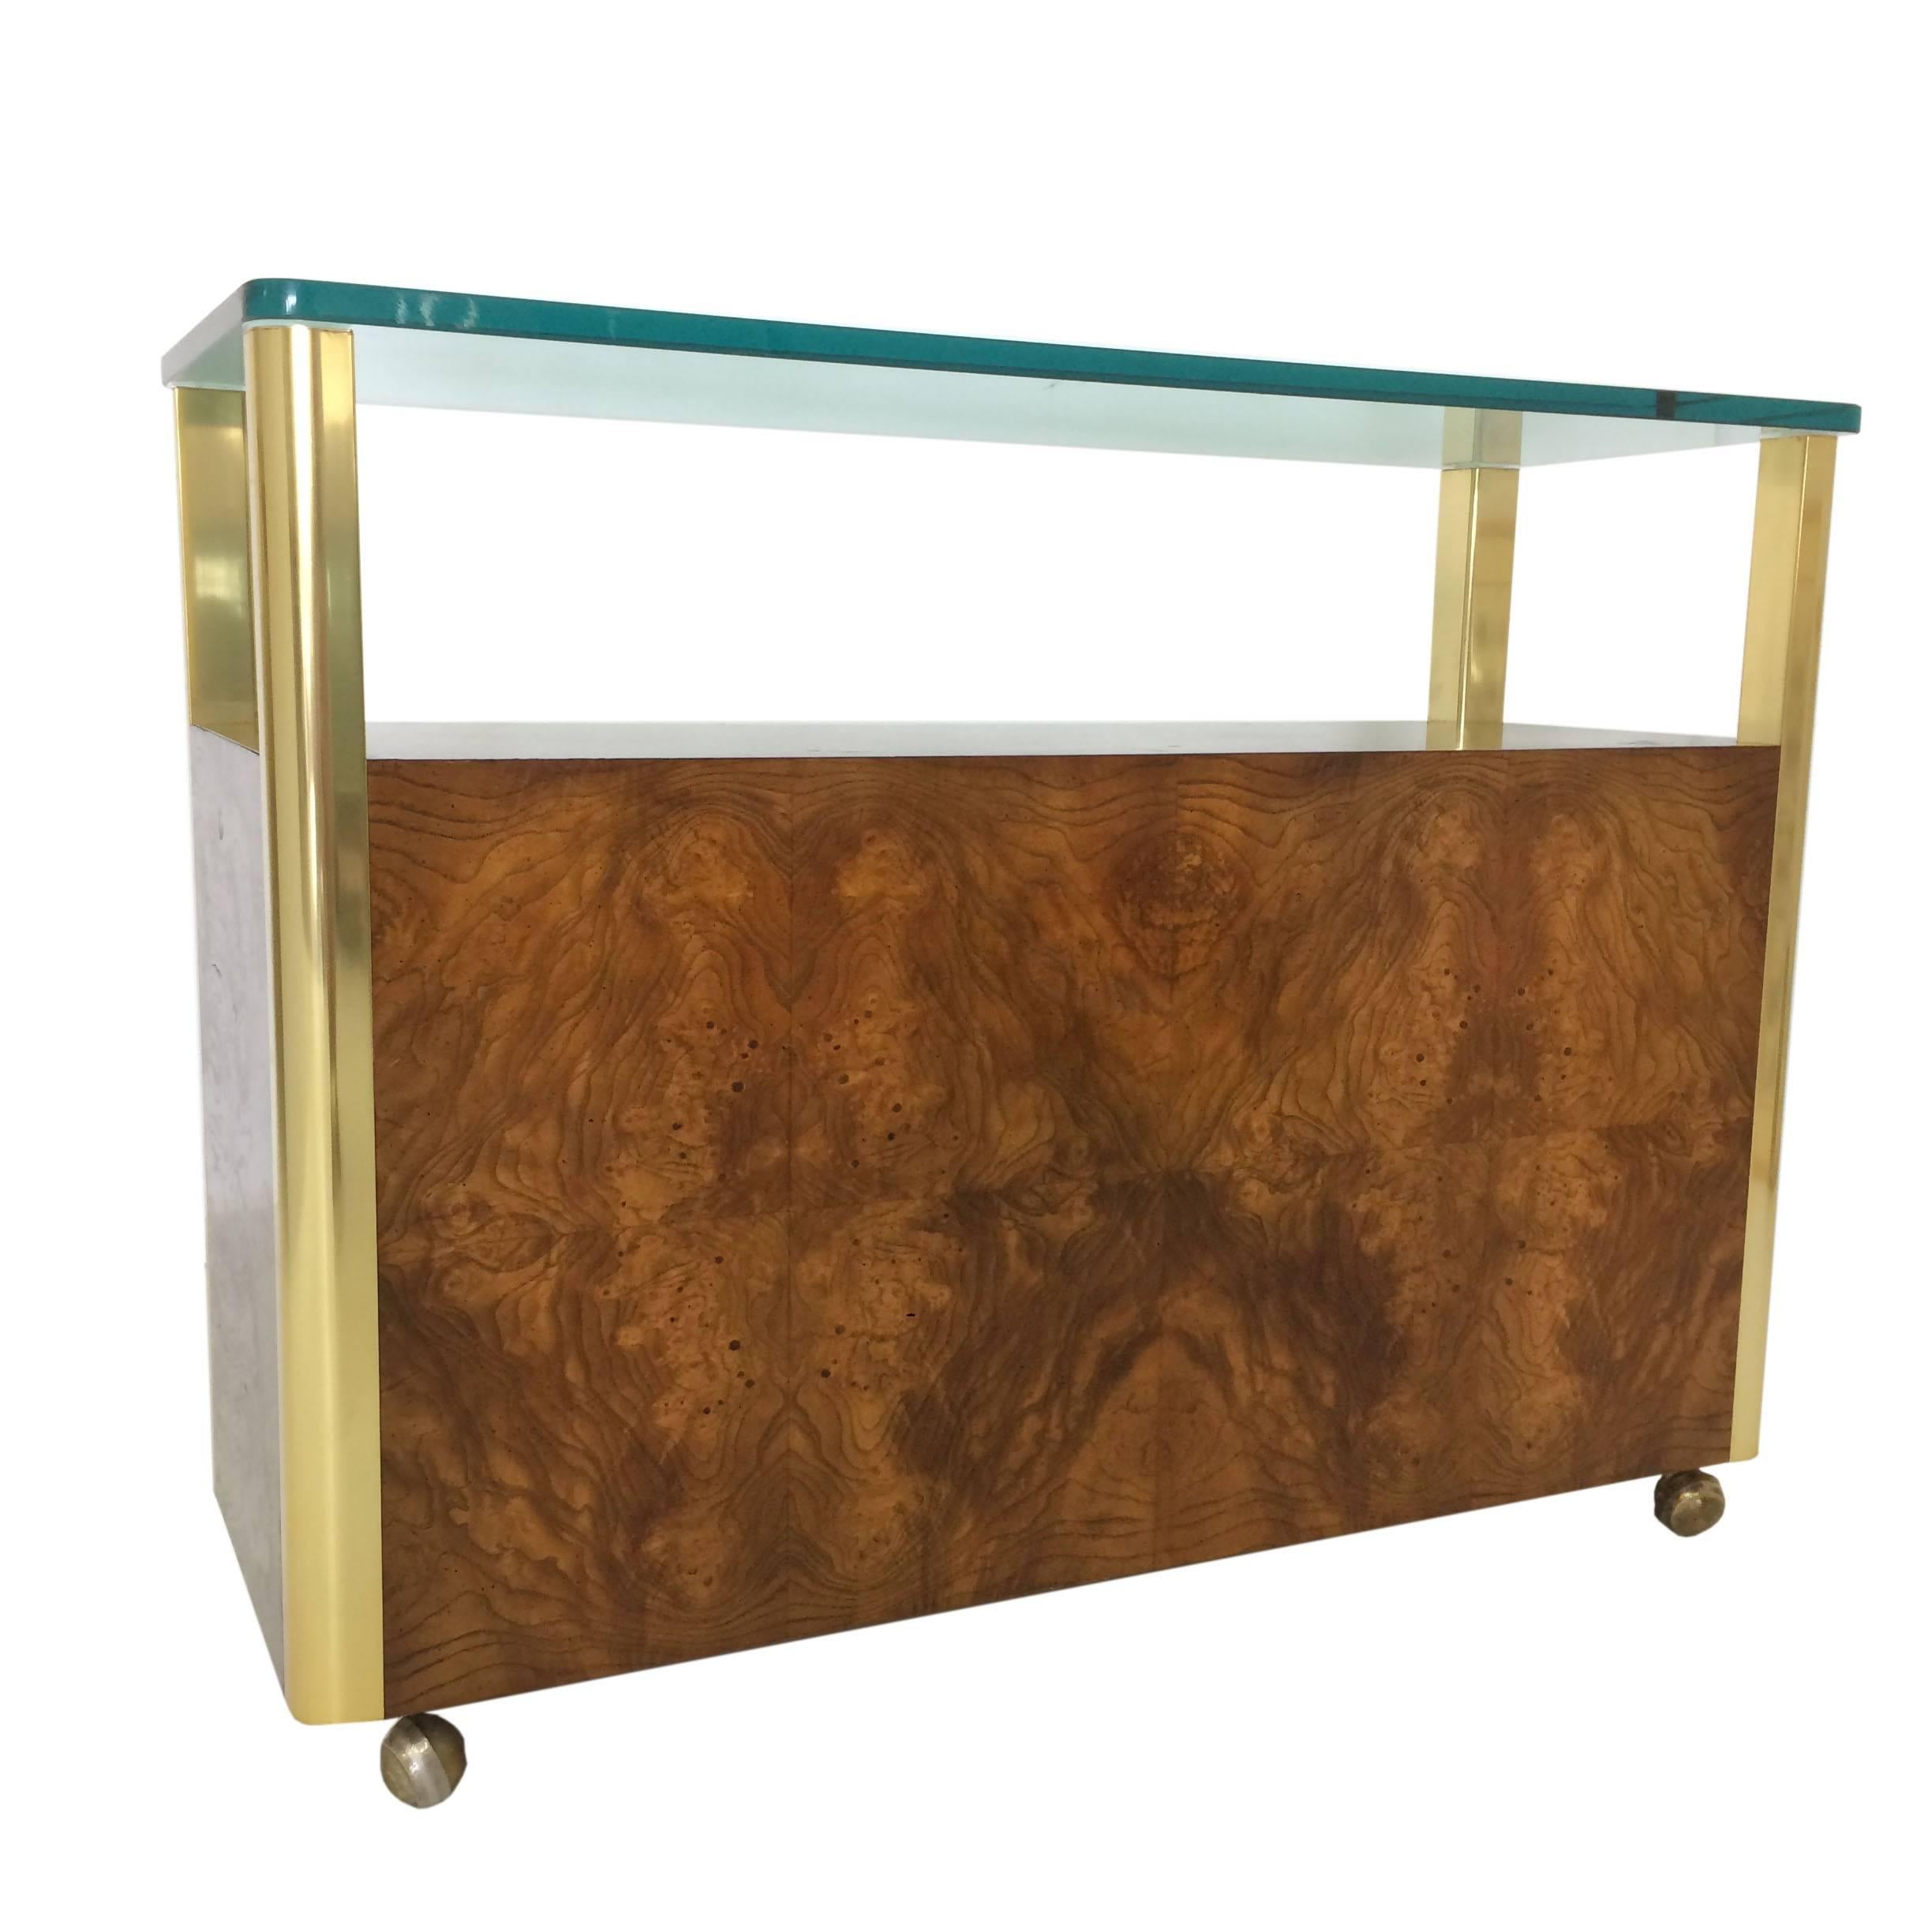 Mid-Century brass, glass and burled wood console by Century Furniture Company. Amazing side piece with brass side rail details, thick glass top and lower two shelf storage. Inside shelf is removable. All four sides are finished. Age appropriate